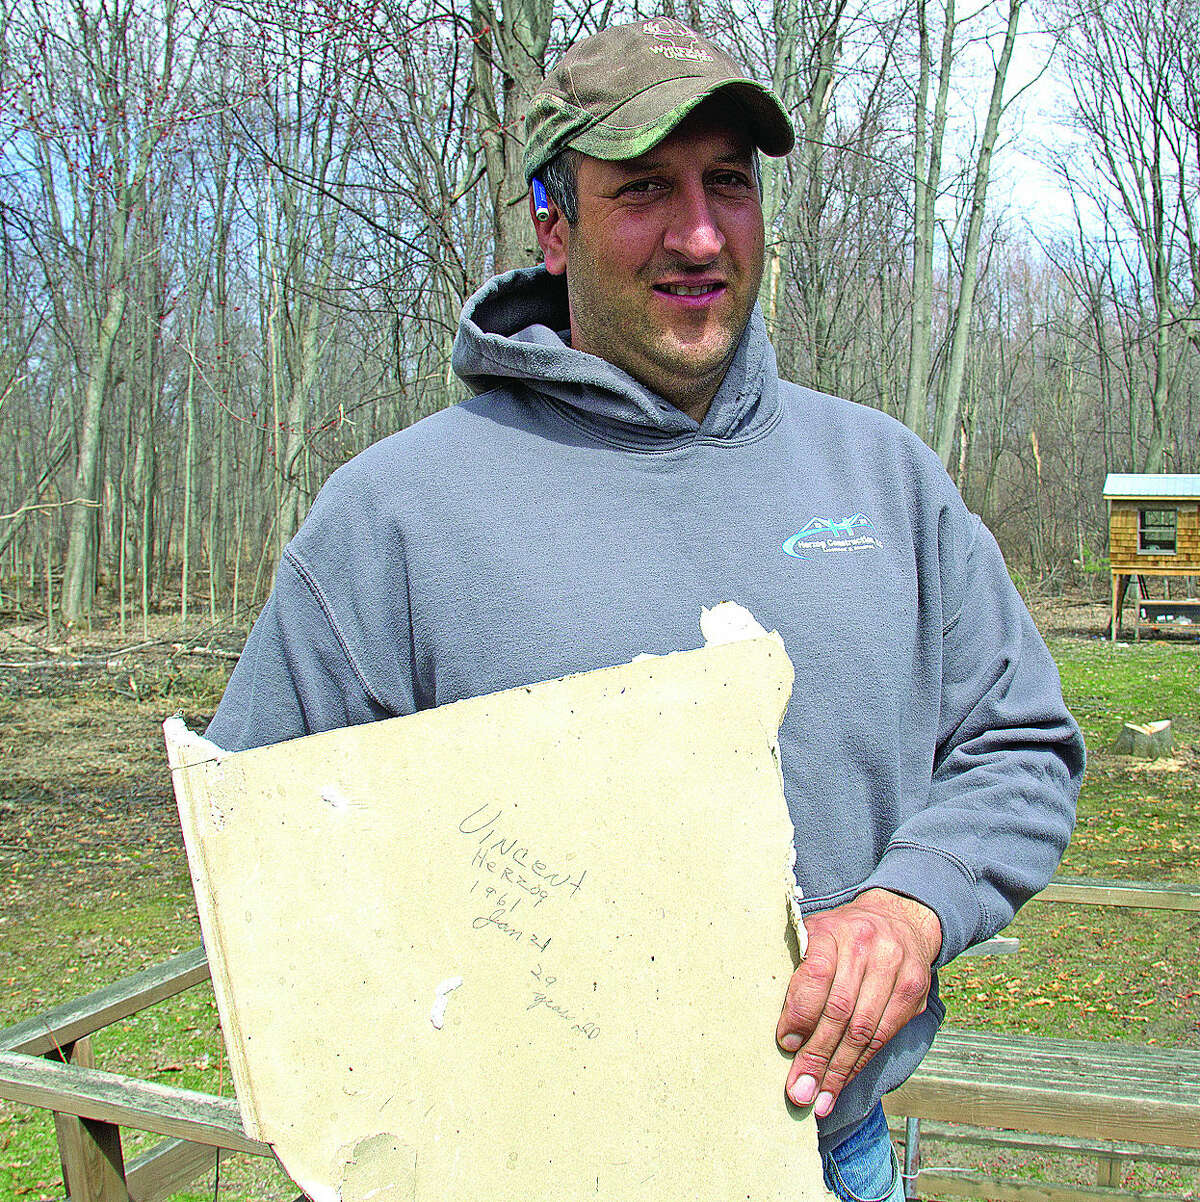 Construction worker Jon Herzog of Pigeon holds a message he uncovered that his late father, Vincent Herzog, wrote in 1961. The message was left in the wall of a Pigeon home — worked on by both Herzogs.